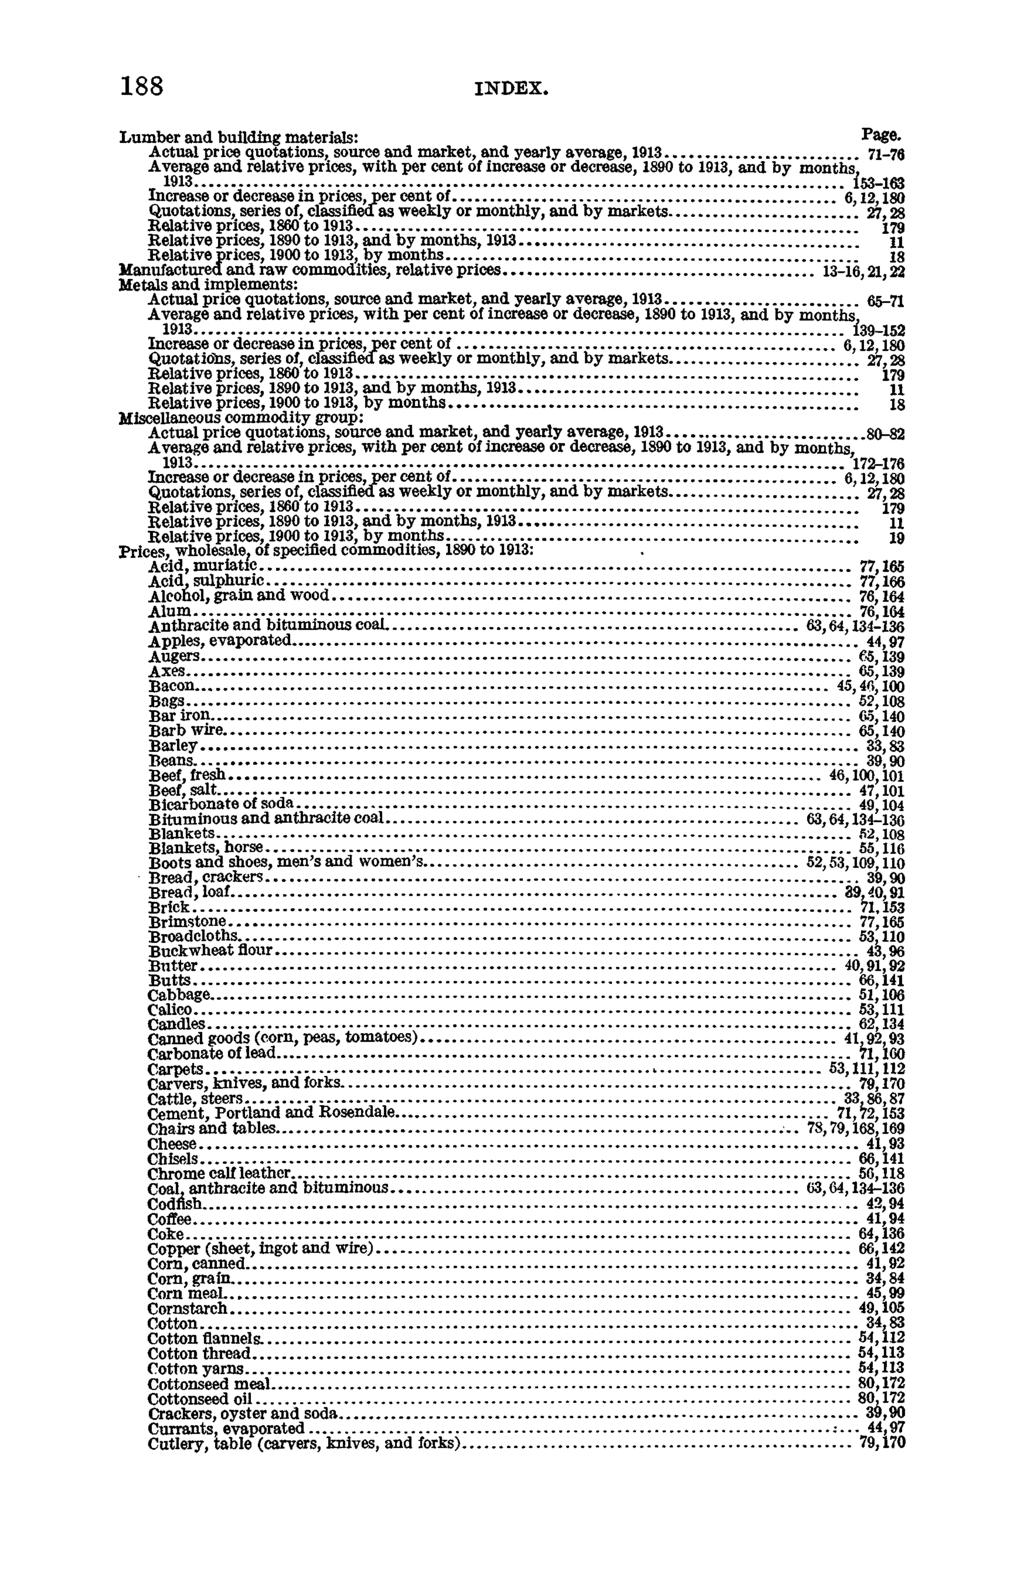 1 8 8 INDEX, Lumber and building materials: Page. Actual quotations, source and market, and yearly average, 1913... 71-70 and relative s, with per cent or, 1890 to 1913, and by months, 1913.